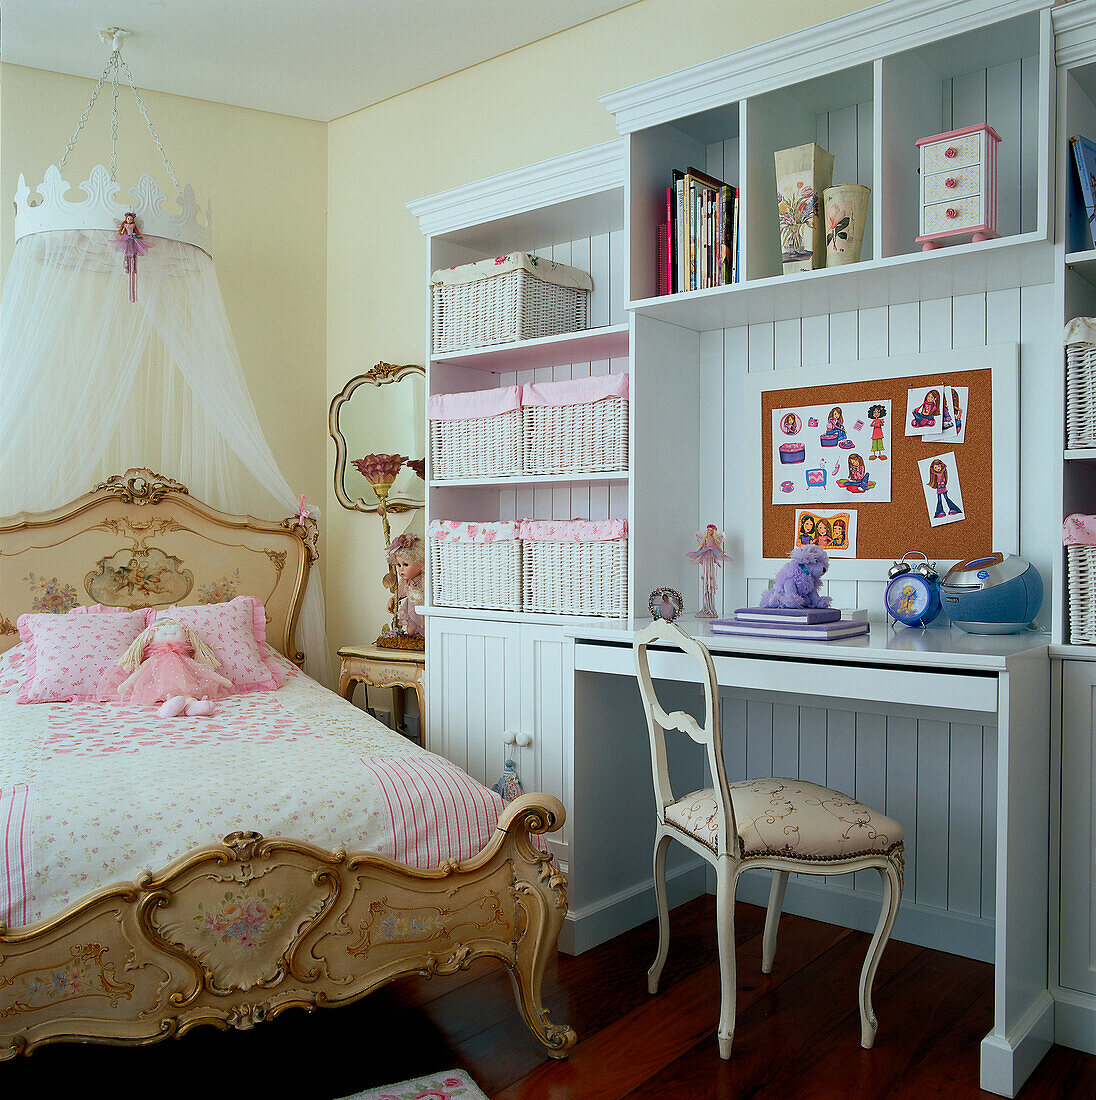 Contemporary child's bedroom with vintage style bed